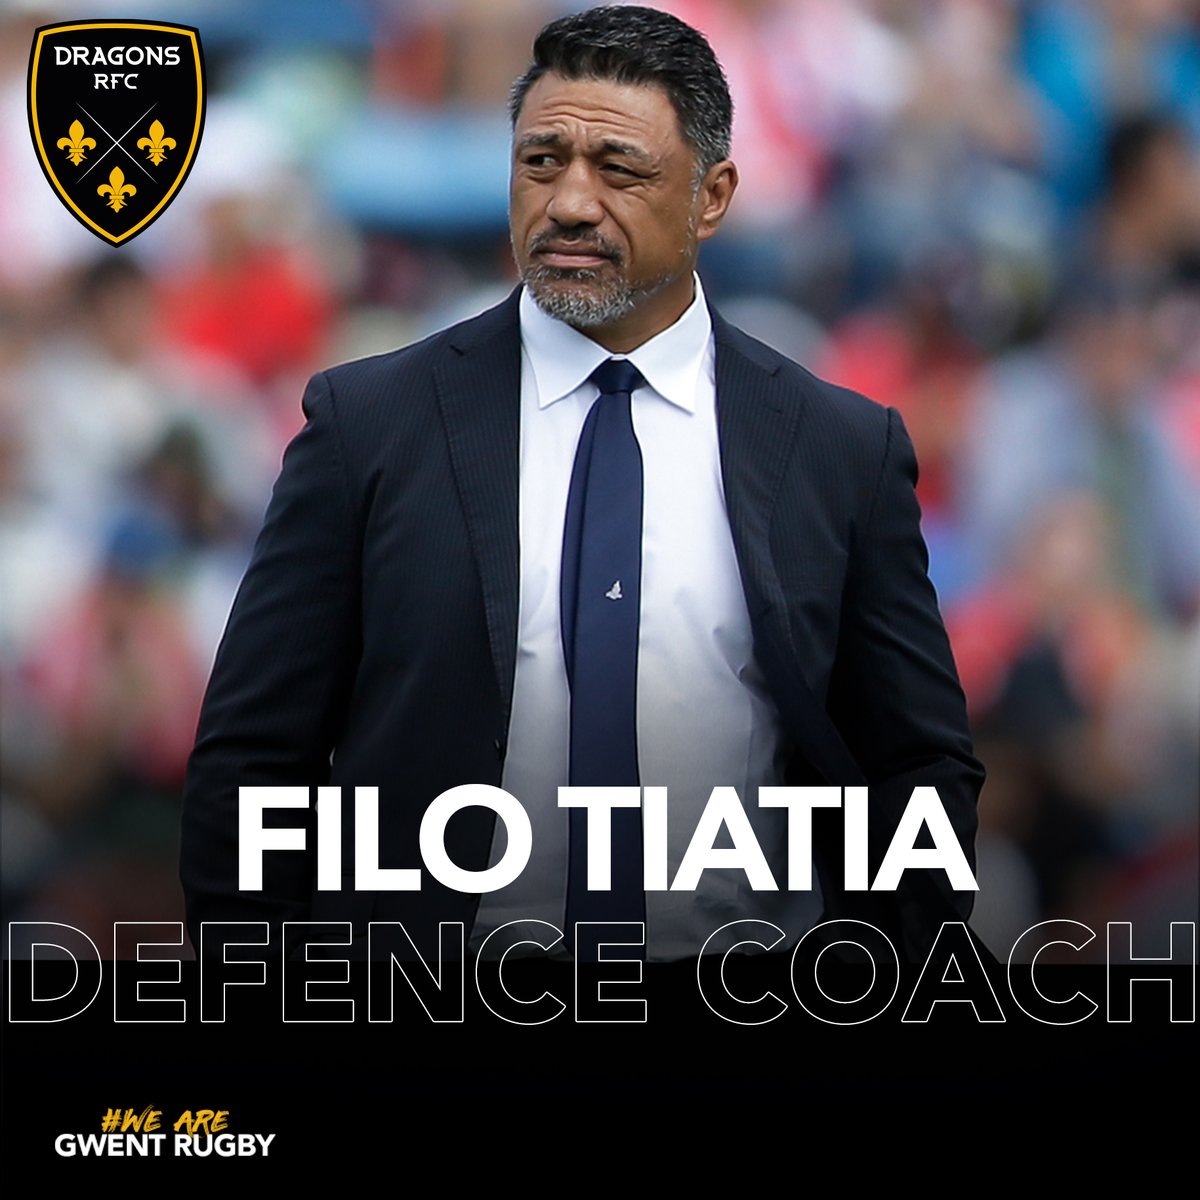 🚨 𝙒𝙀𝙇𝘾𝙊𝙈𝙀 𝙁𝙄𝙇𝙊 𝙏𝙄𝘼𝙏𝙄𝘼 🐉🔥

Dragons RFC are delighted to announce that former All-Black Filo Tiatia will join the coaching staff as defence coach ahead of the 2024/25 season! 🙌💪

🇳🇿 Afio Mai Filo ❤️

#WeAreGwentRugby